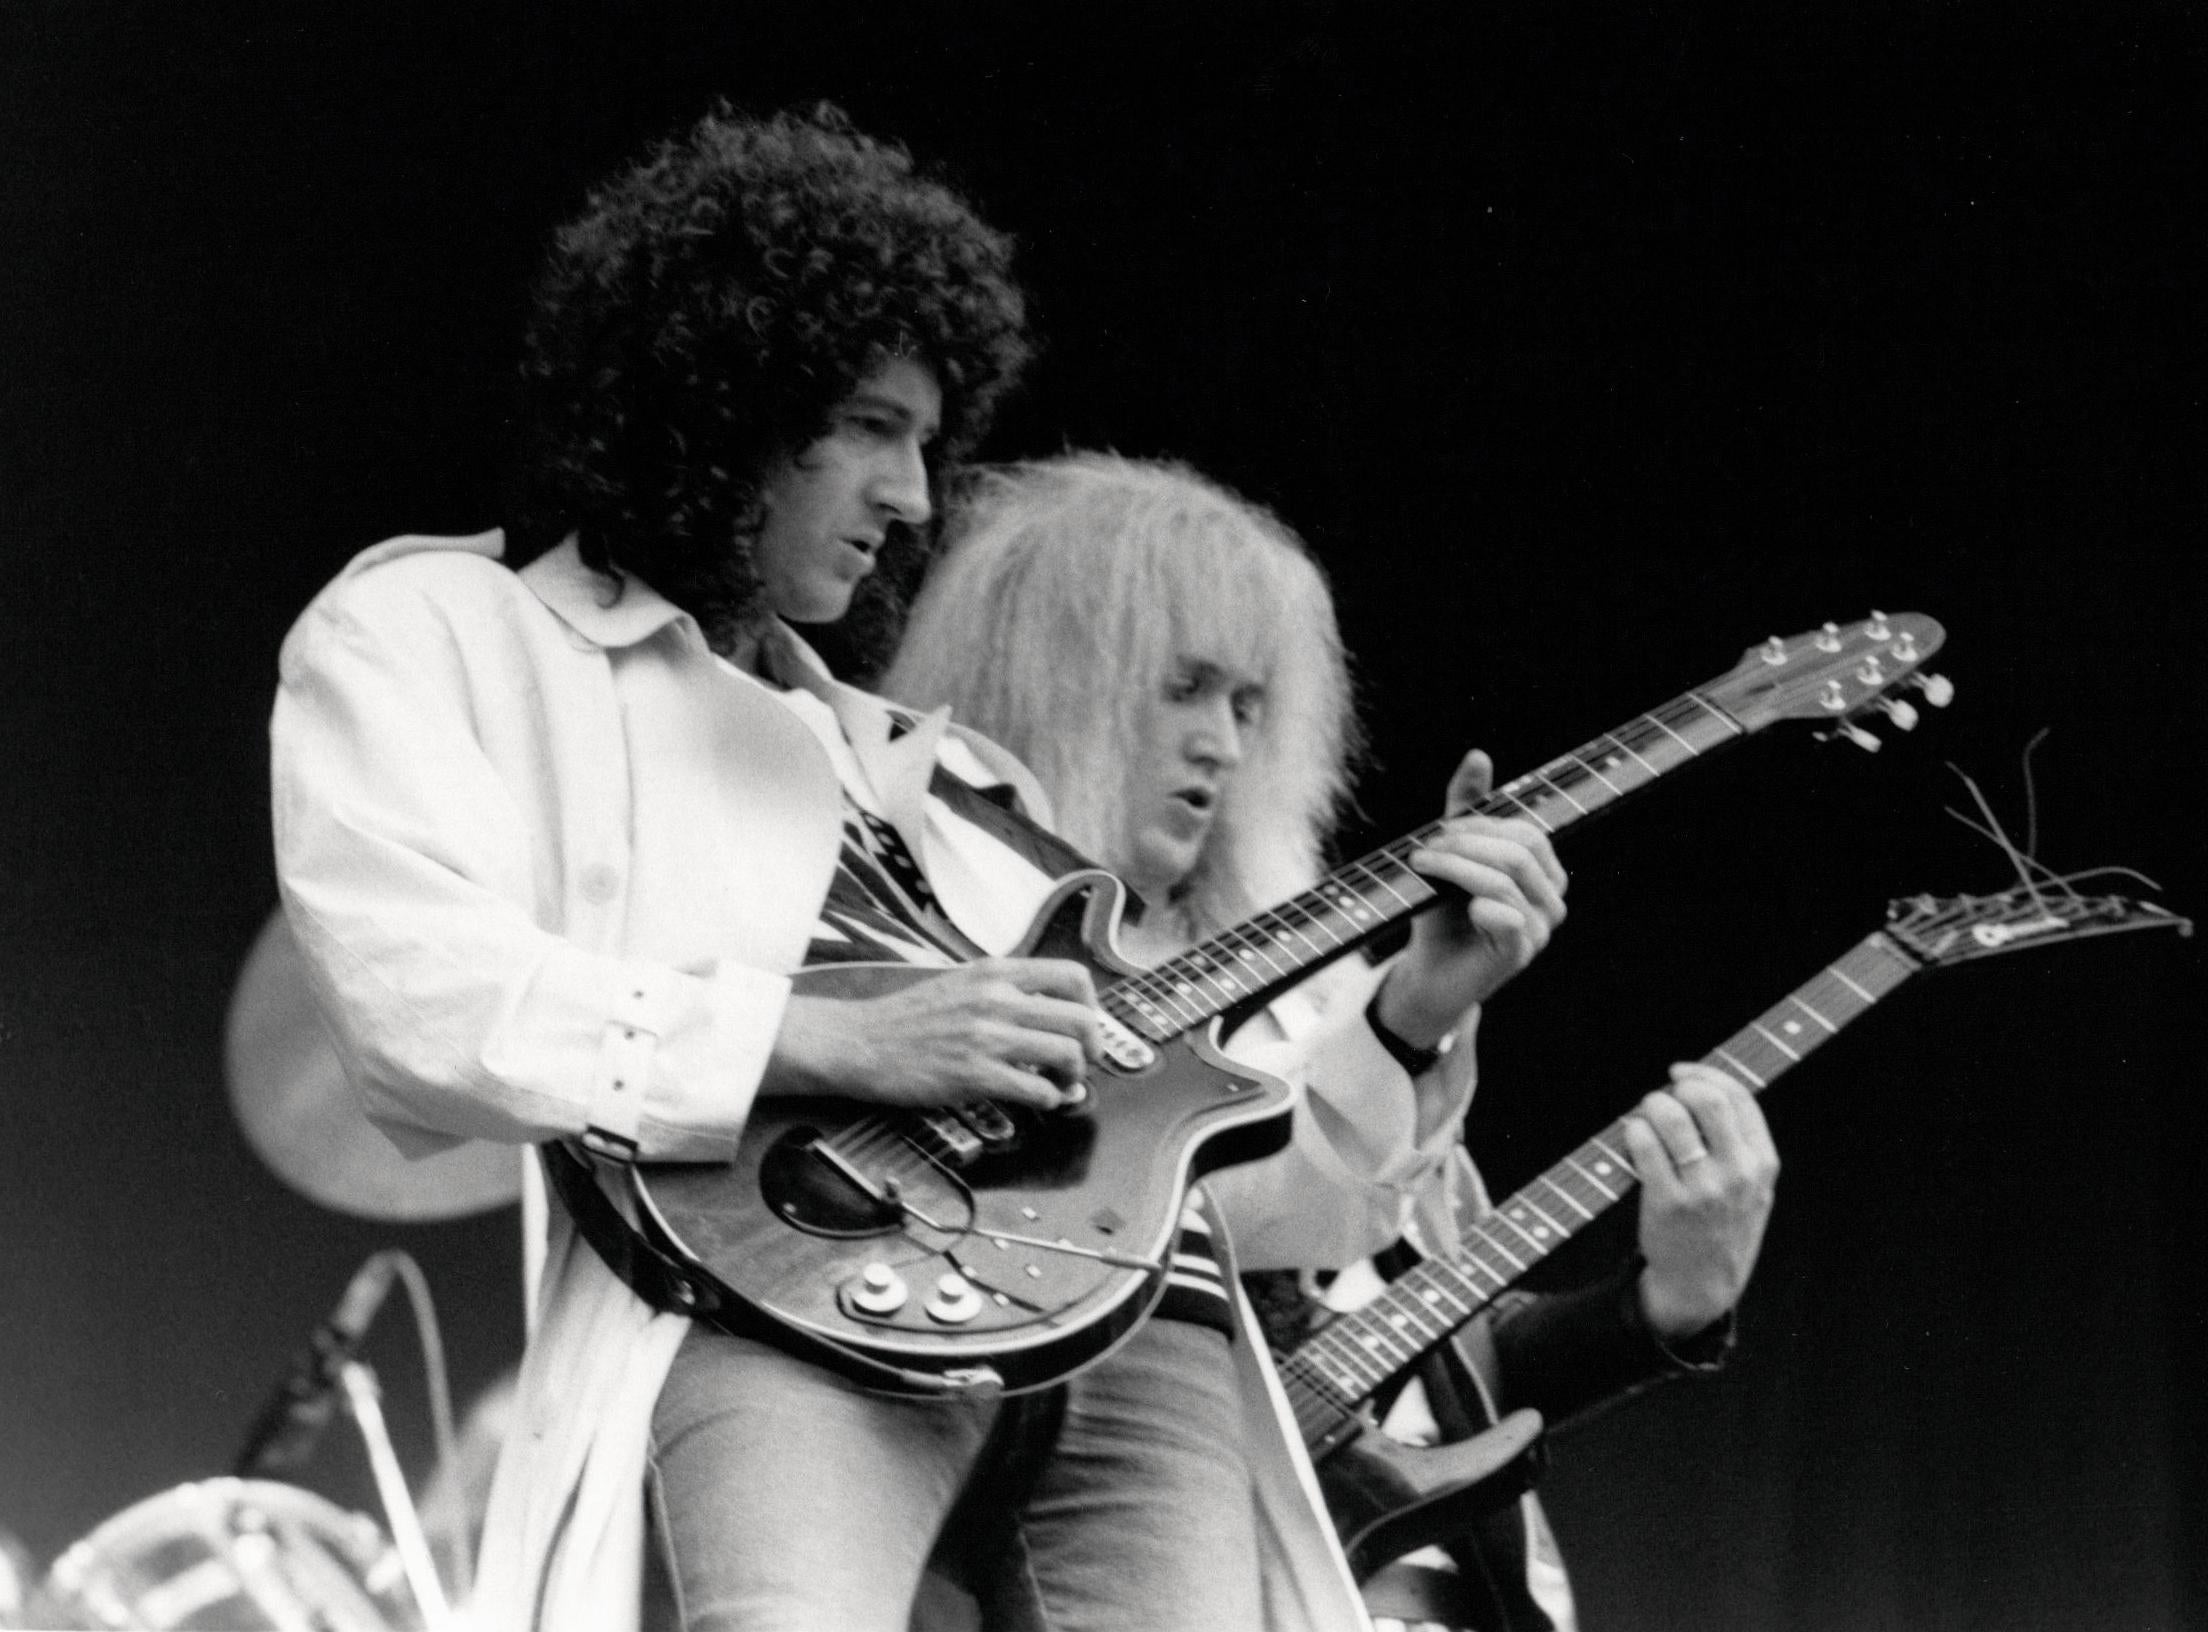 Frank Griffin Black and White Photograph - Brian May and Bad News Rocking Out on Stage Vintage Original Photograph